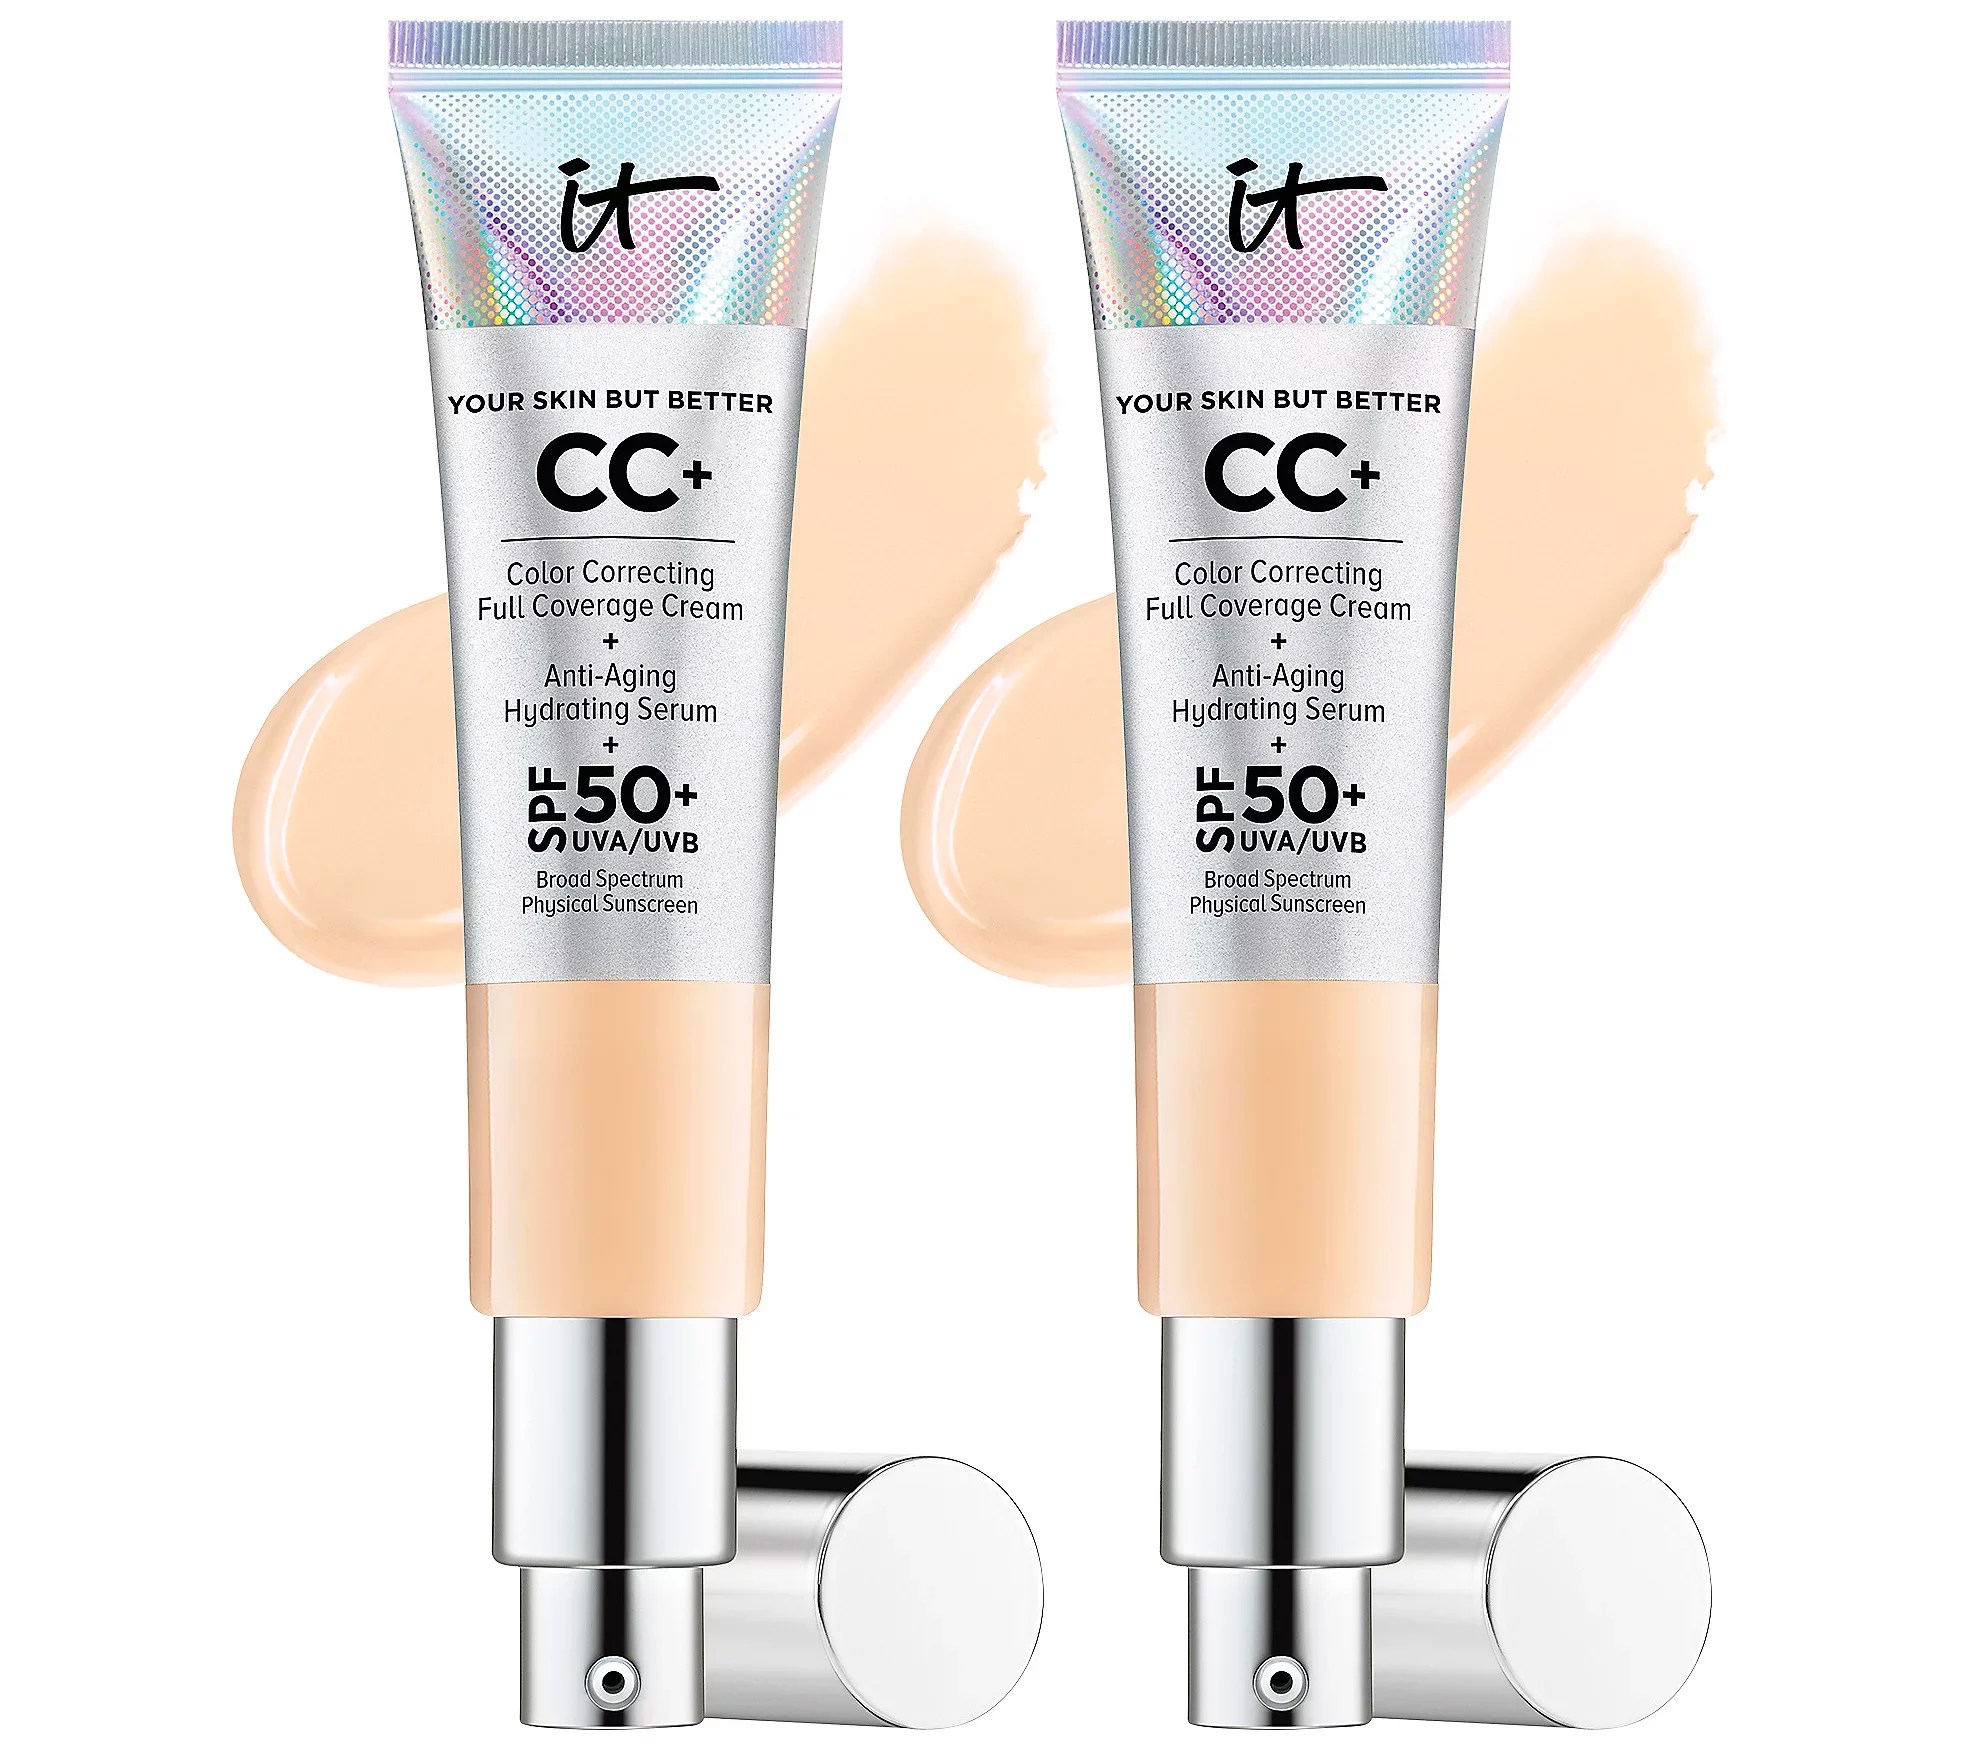 An Honest Review of It Cosmetics CC+ Foundation